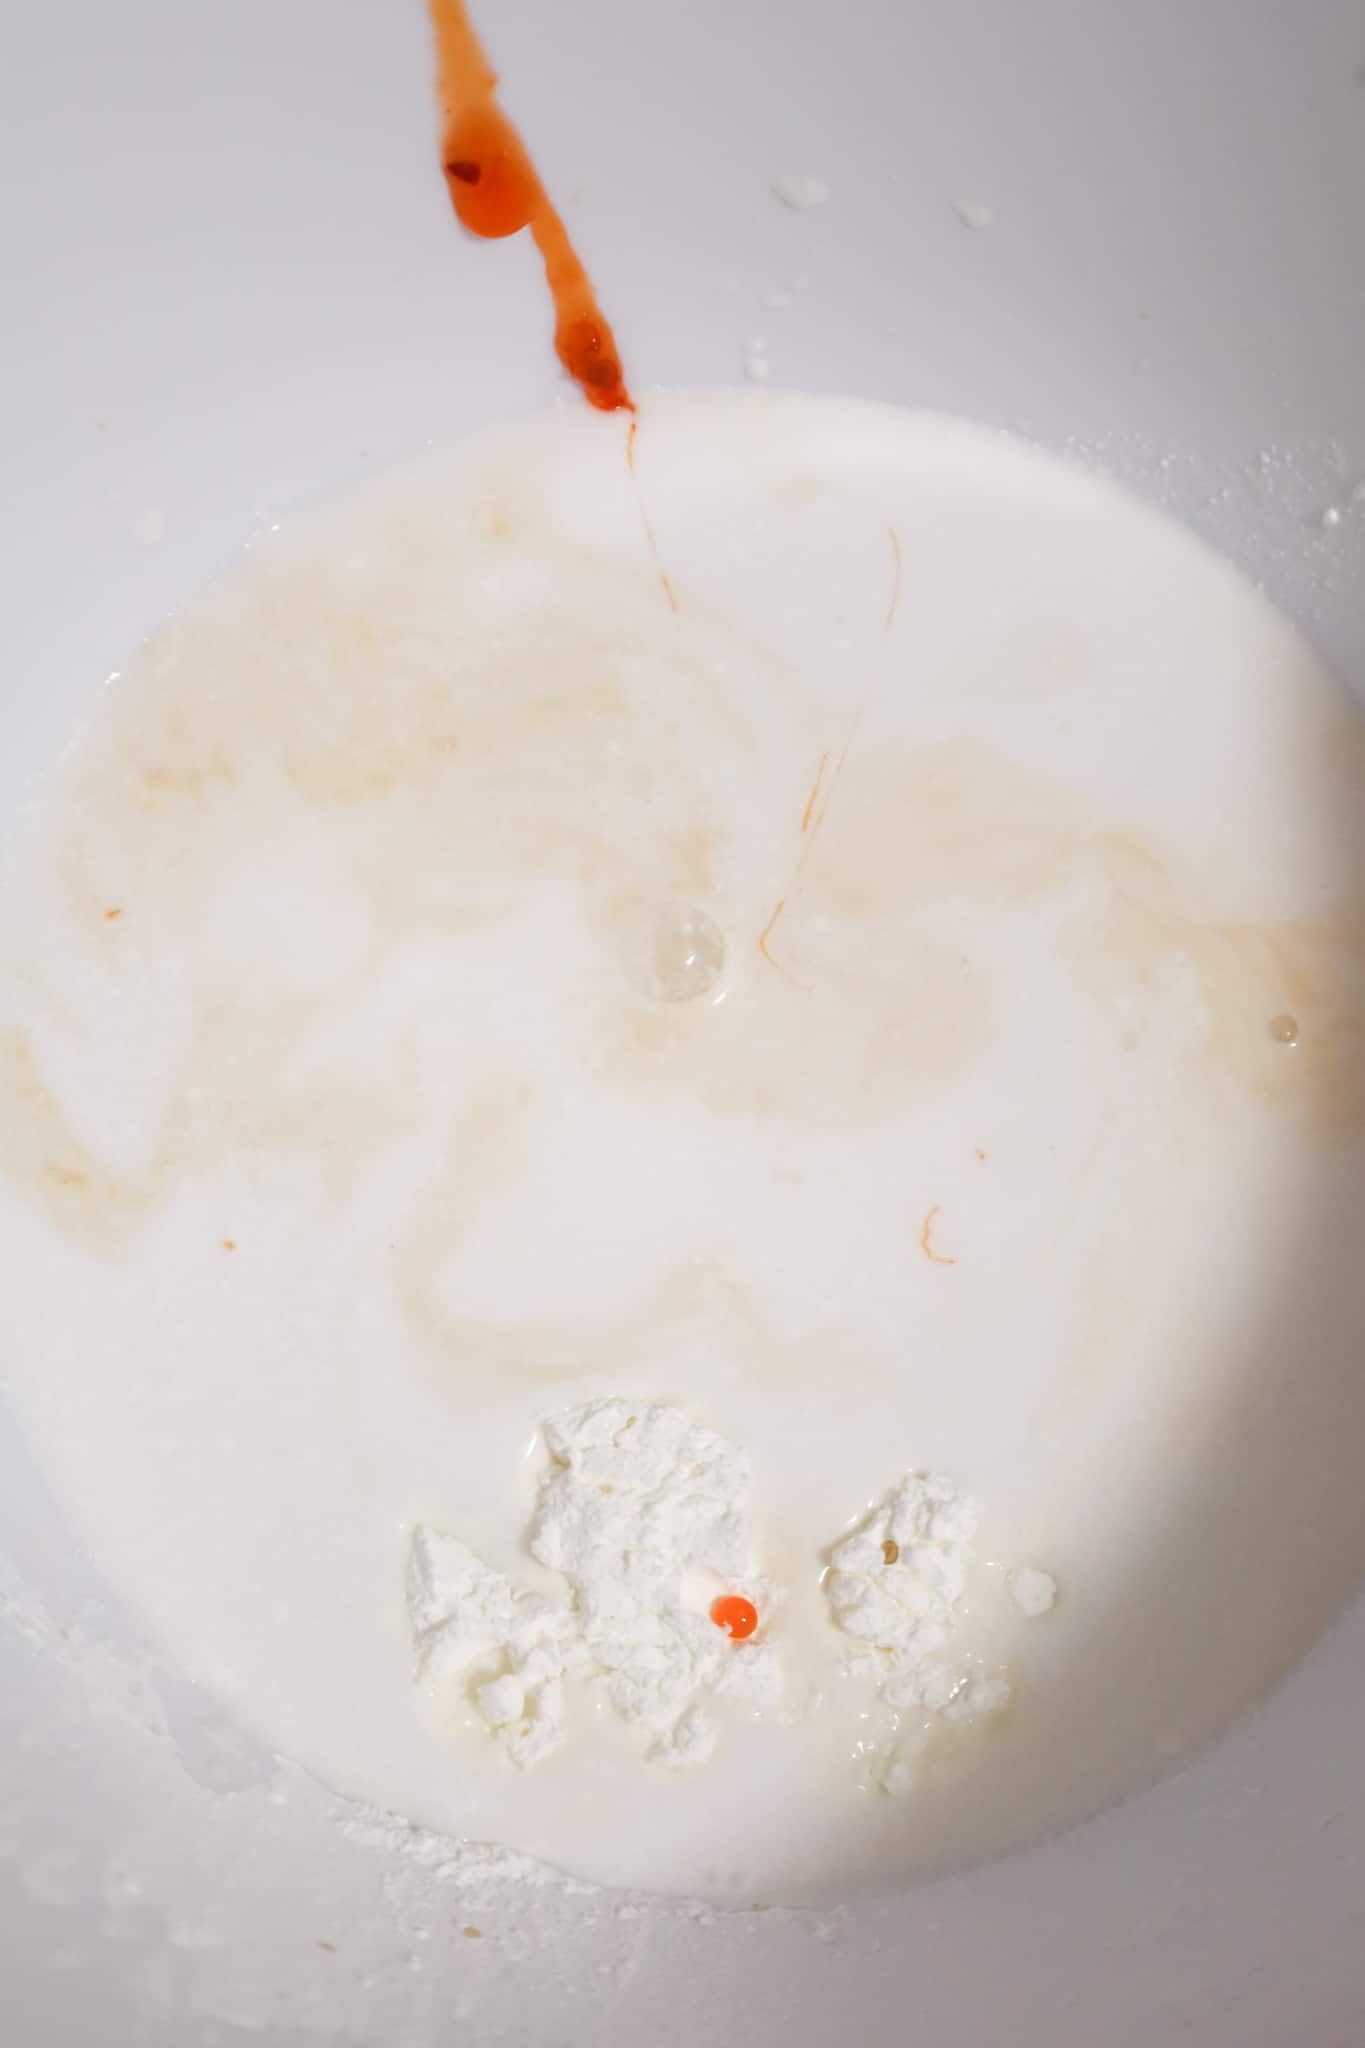 cornstarch, soy sauce, sweet chili sauce and coconut milk in a mixing bowl